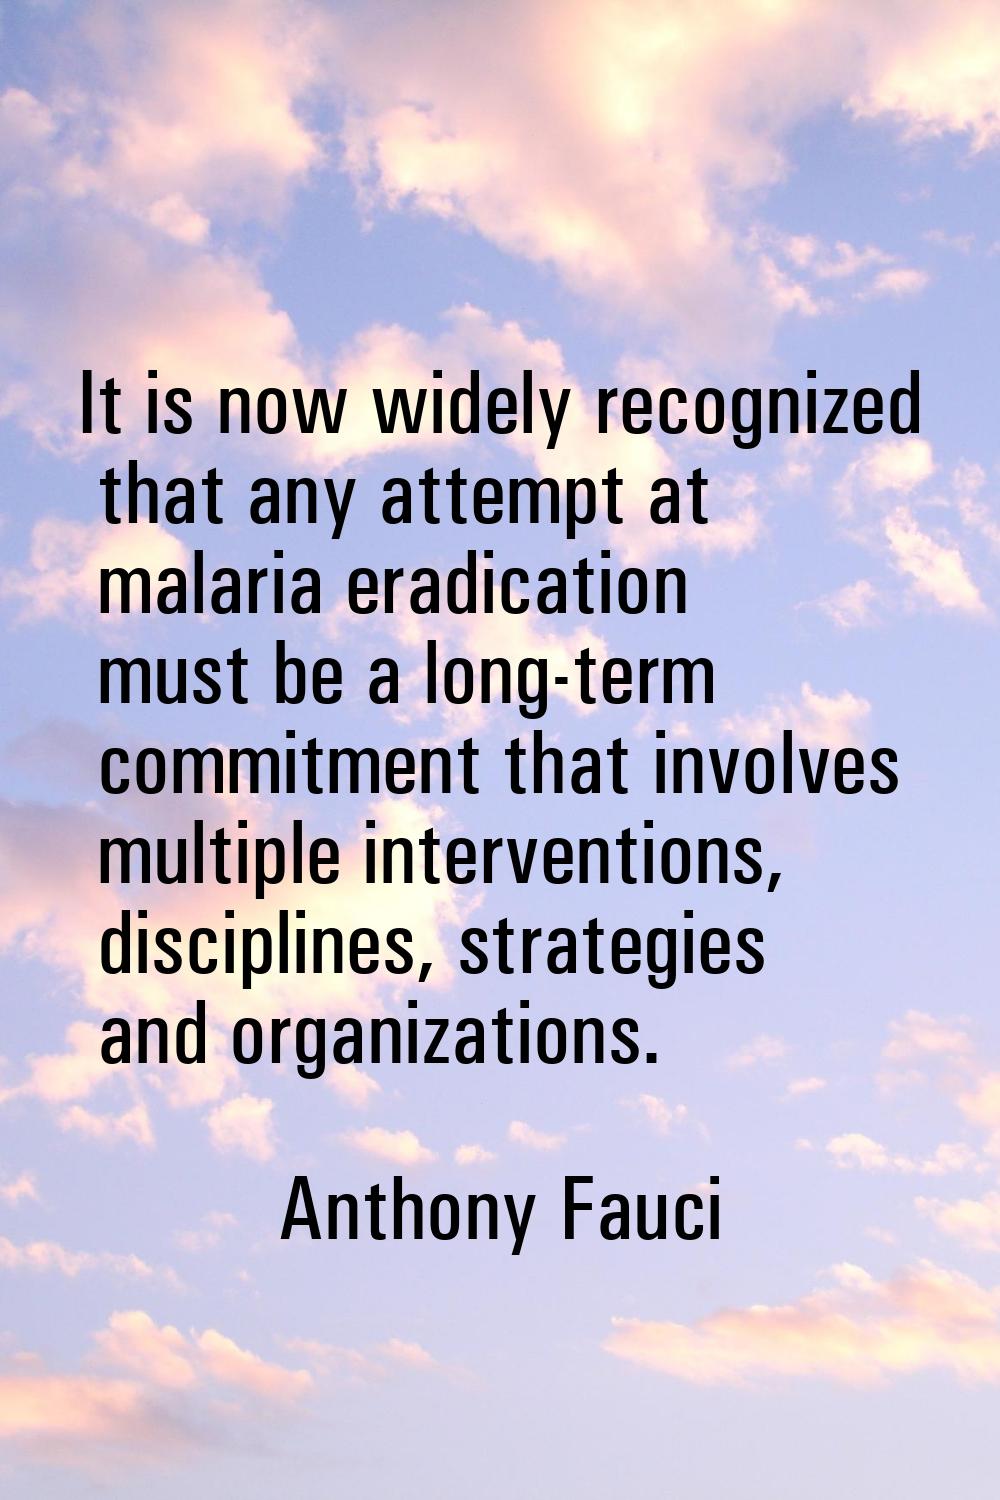 It is now widely recognized that any attempt at malaria eradication must be a long-term commitment 